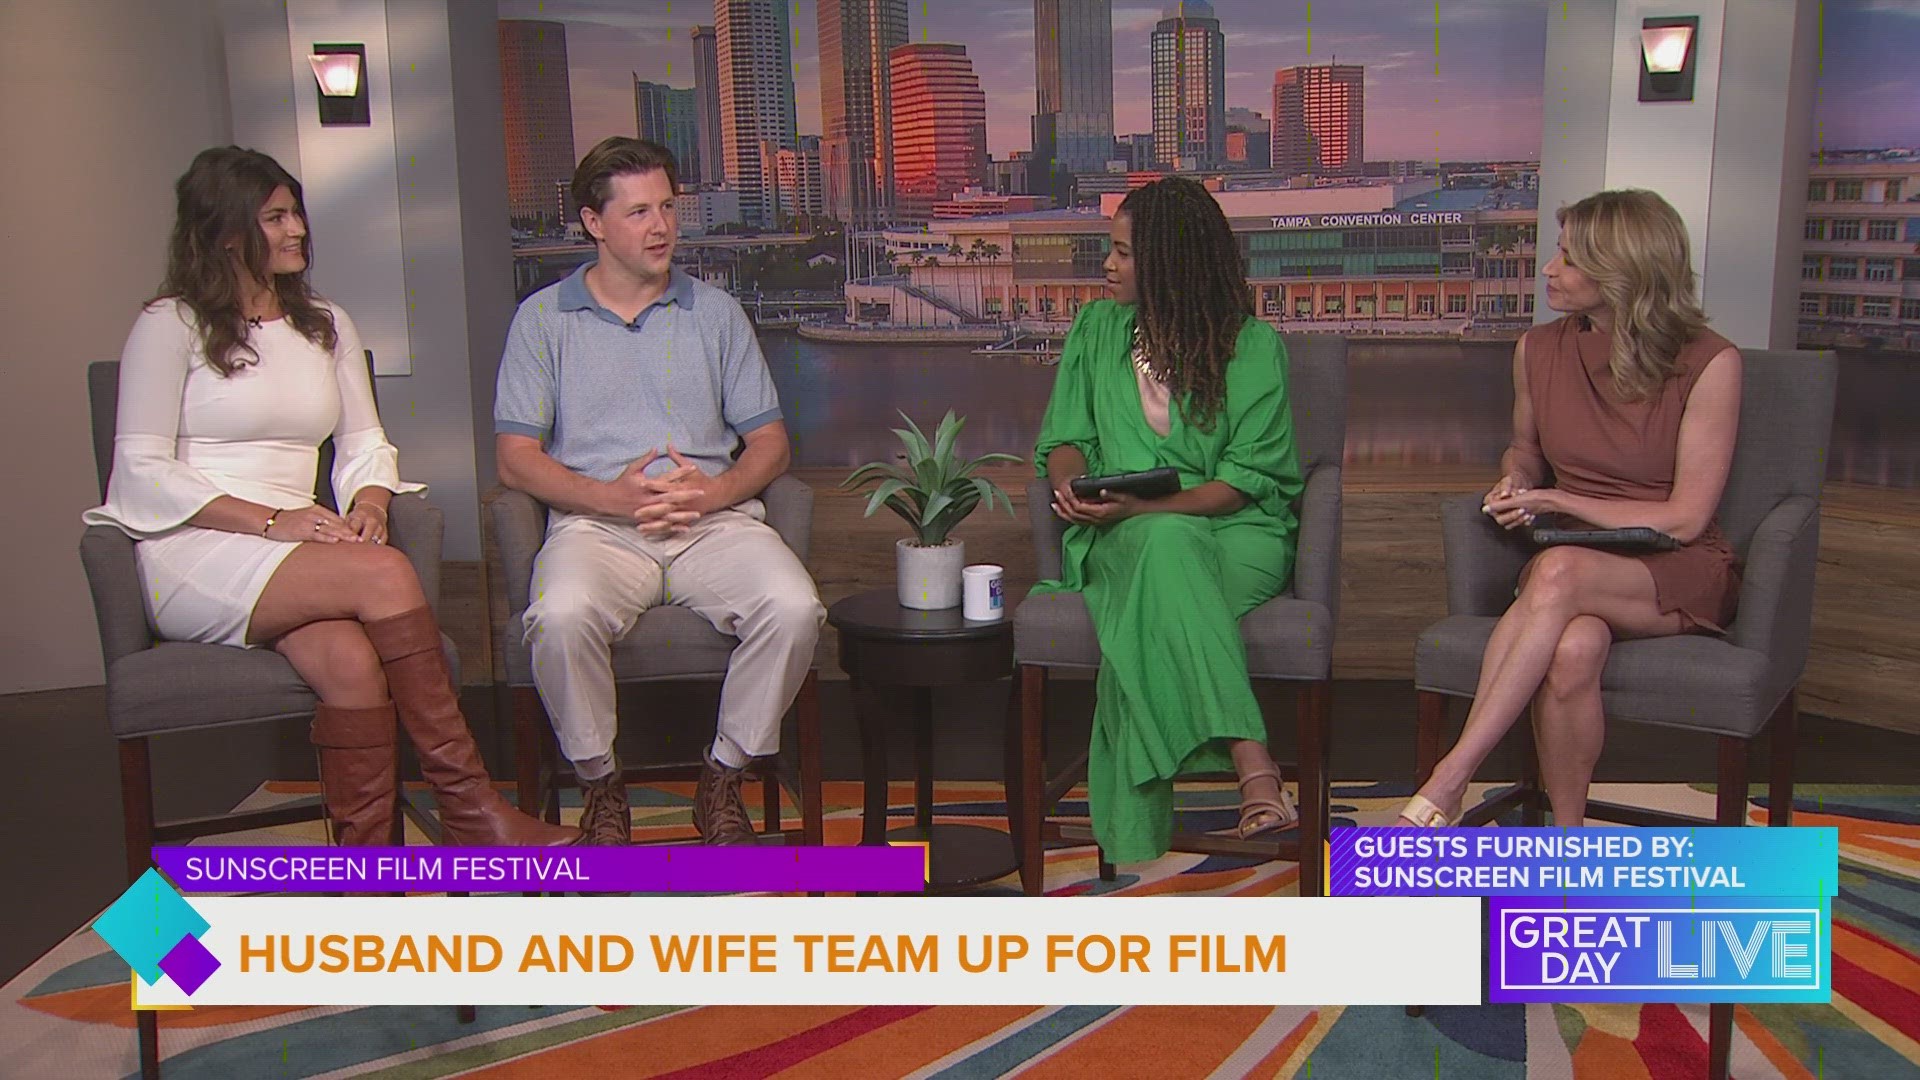 Austin and Hailey Spicer joined GDL to talk about their new movie, I Feel Fine, that will debut at this year’s Sunscreen Film Festival in St. Pete.